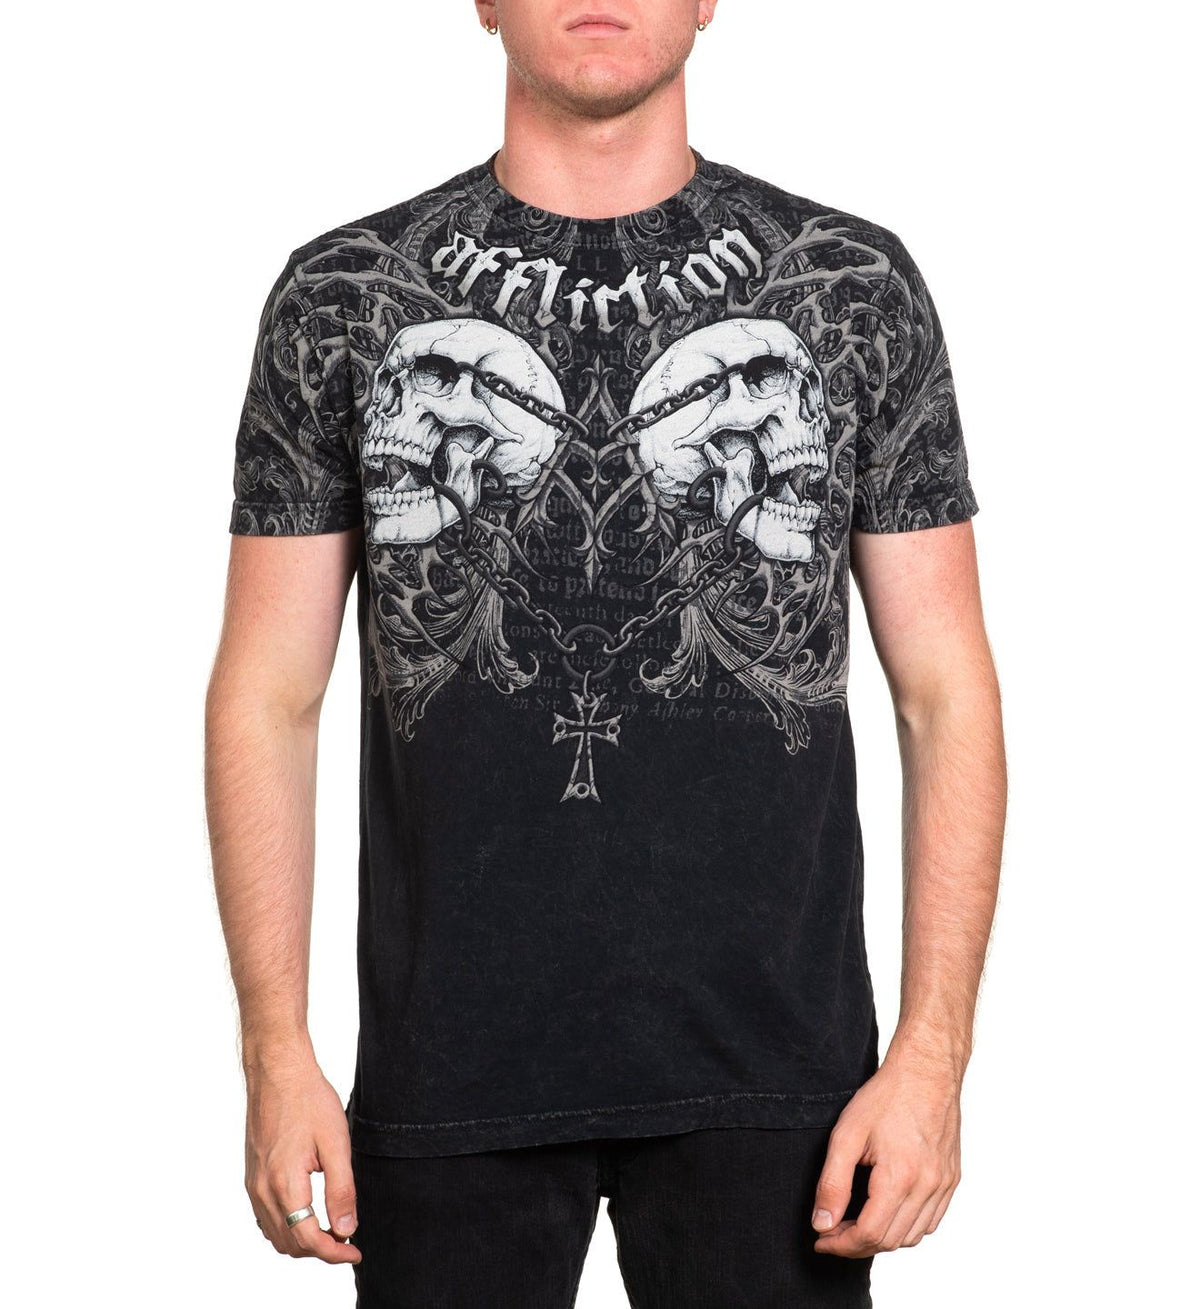 Collapse - Affliction Clothing